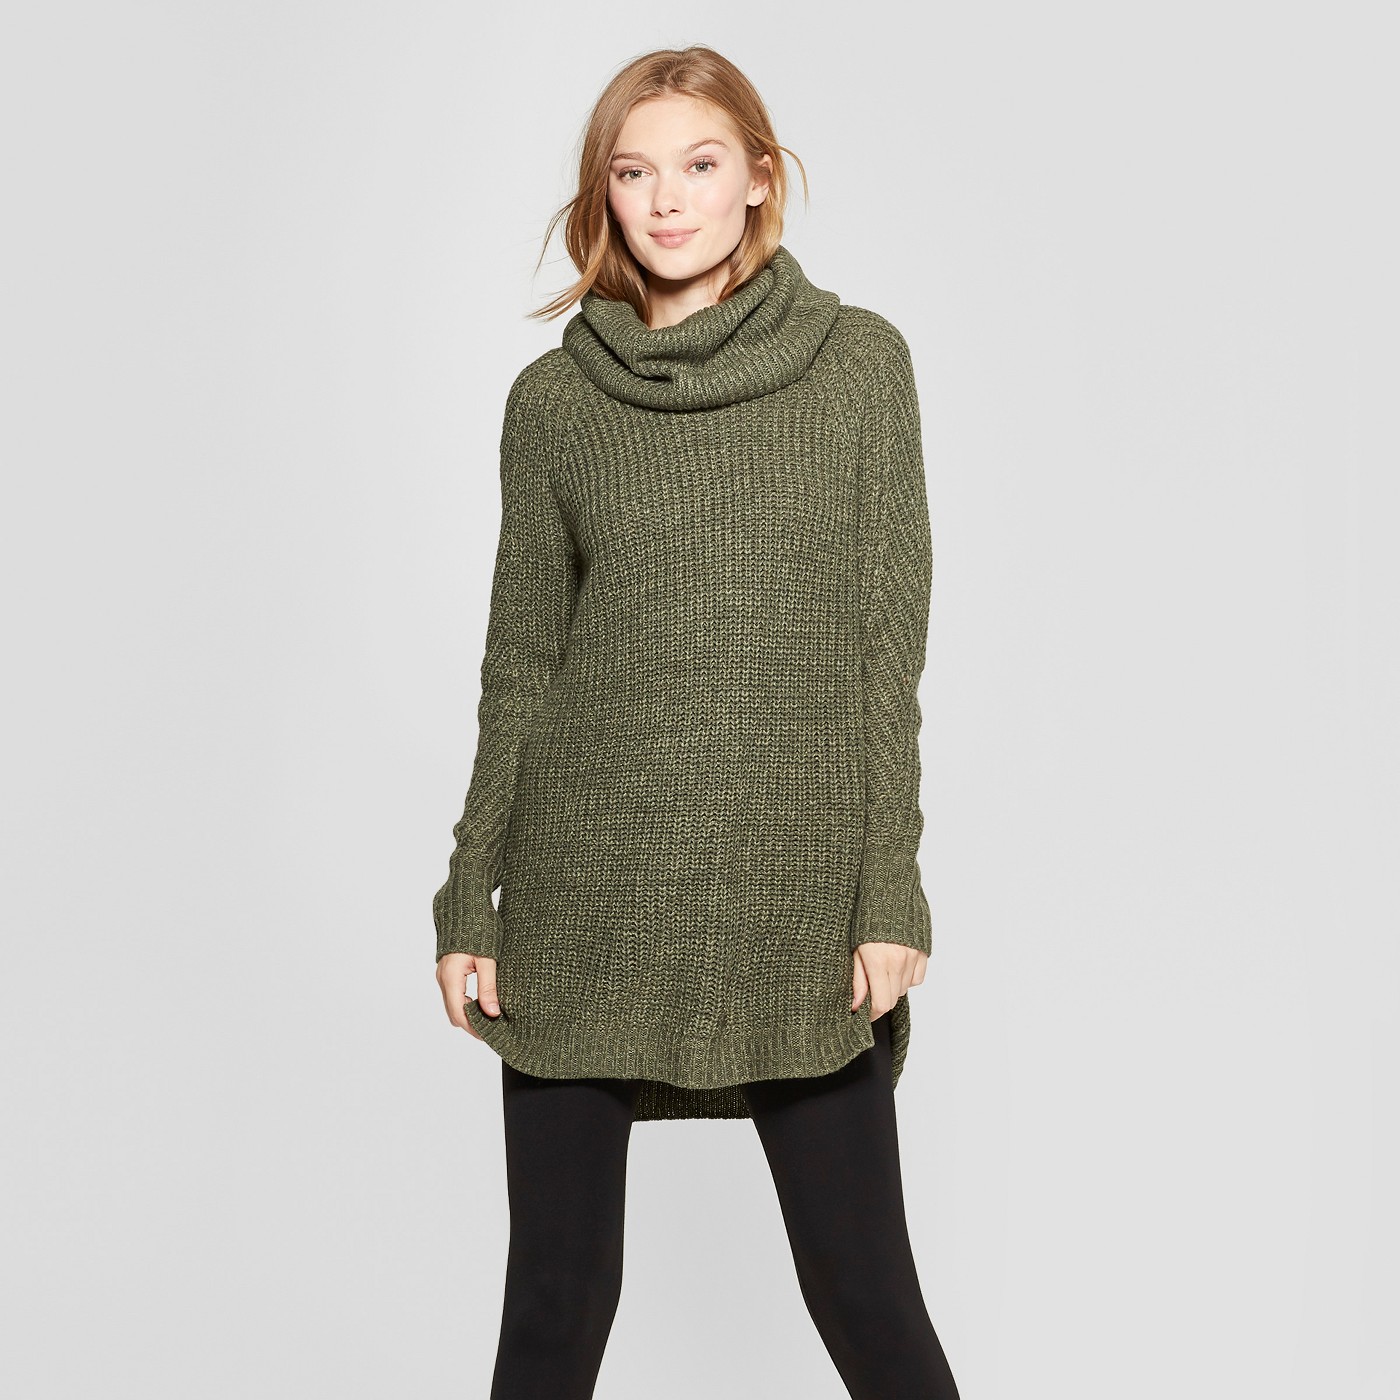 Women's Cozy Neck Pullover - A New Dayâ„¢ - image 1 of 3